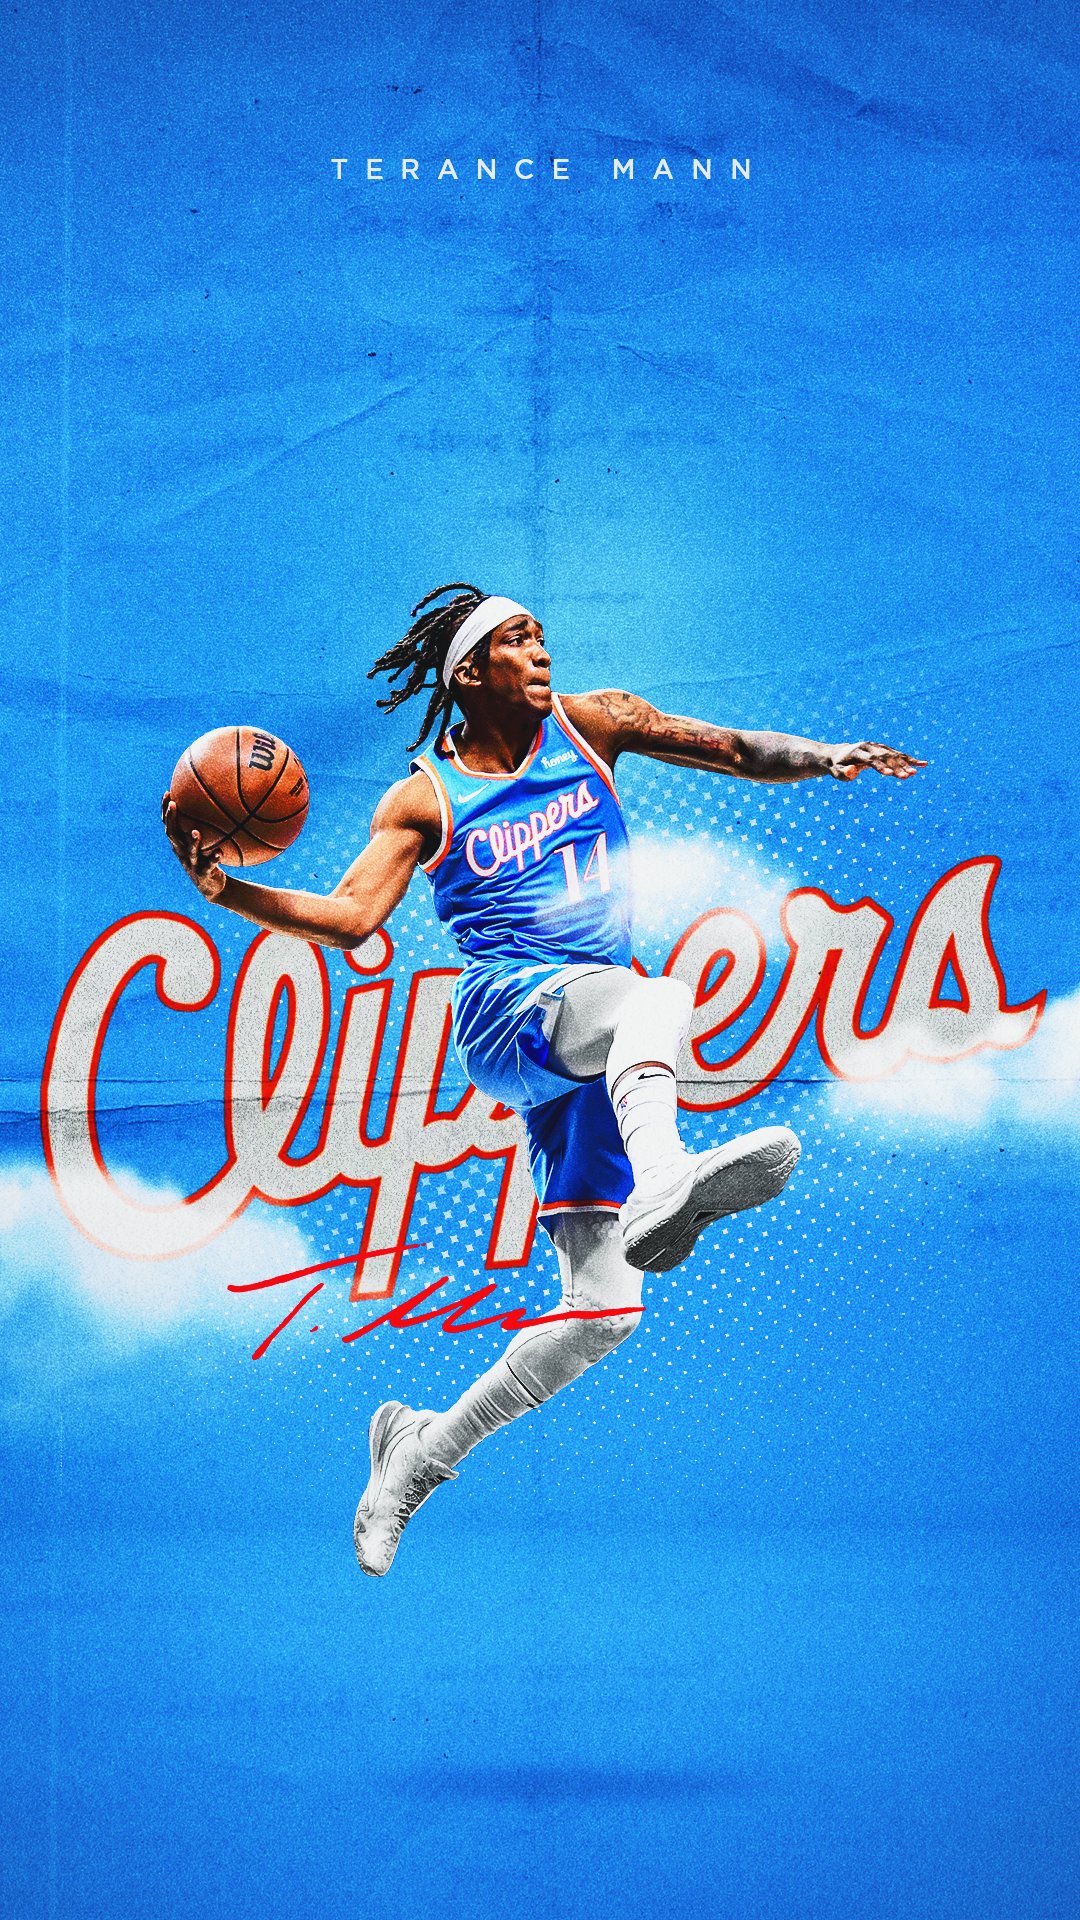 Wallpaper wallpaper sport logo basketball NBA Los Angeles Clippers  glitter checkered images for desktop section спорт  download